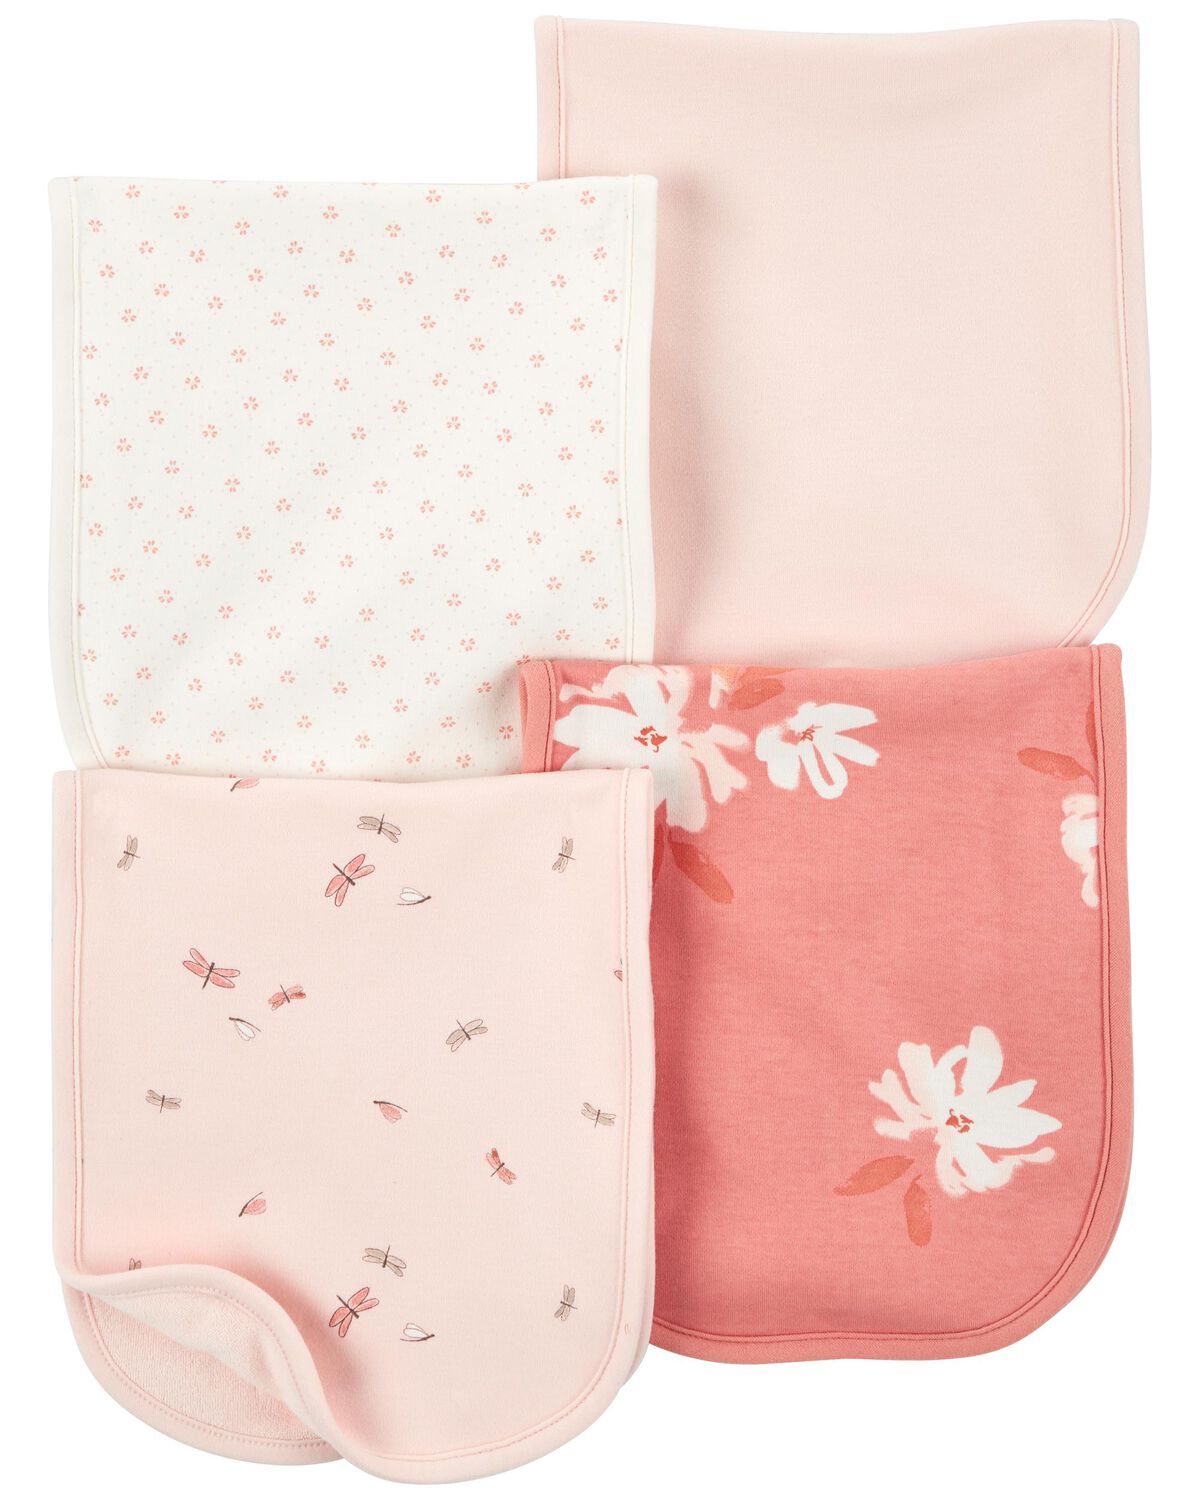 Carters Pink Baby 4-Pack Burp Cloths